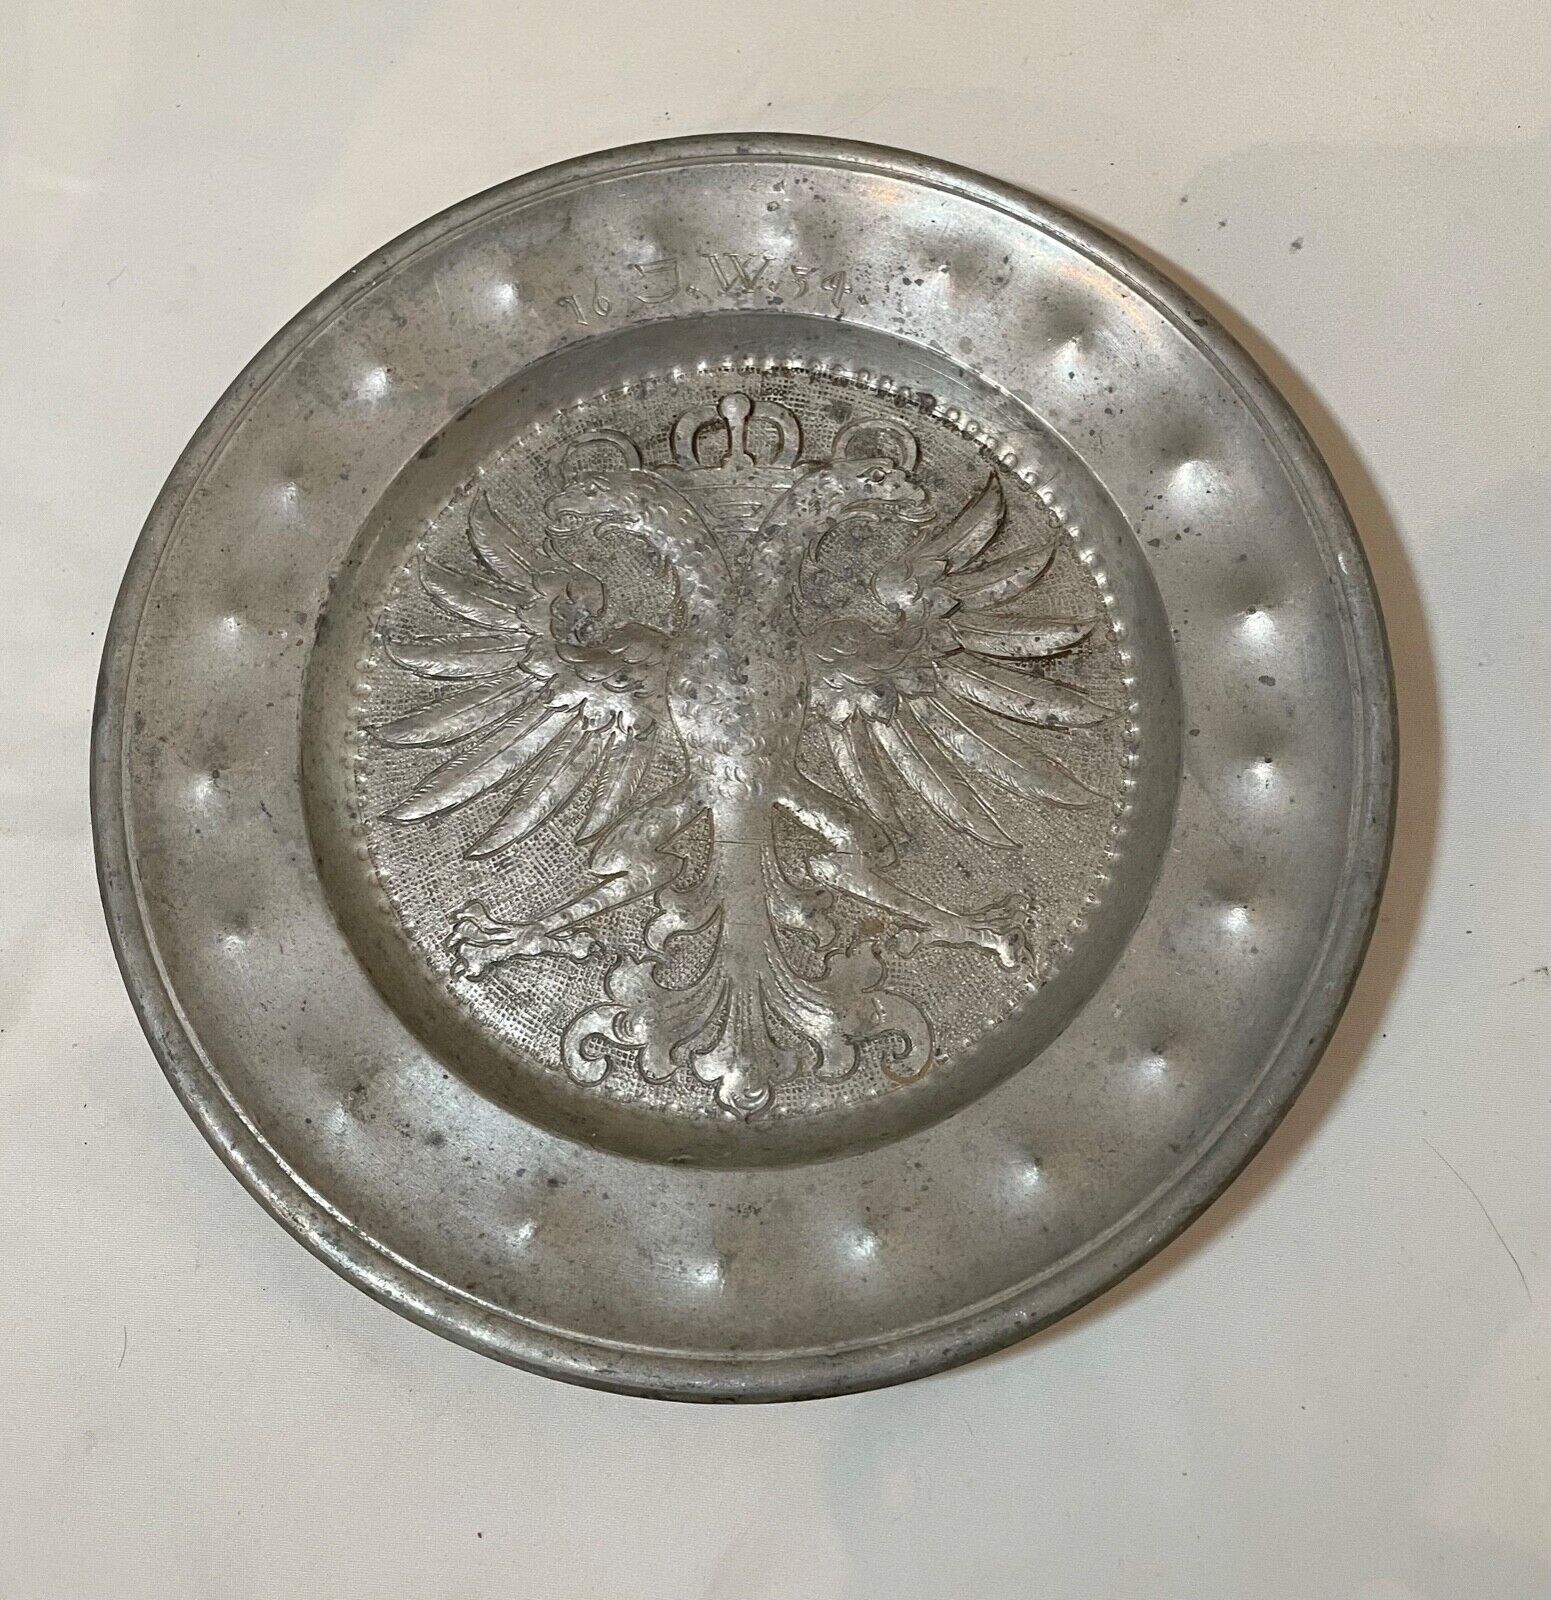 rare antique 1634 17th century engraved hand forged pewter eagle dinner plate